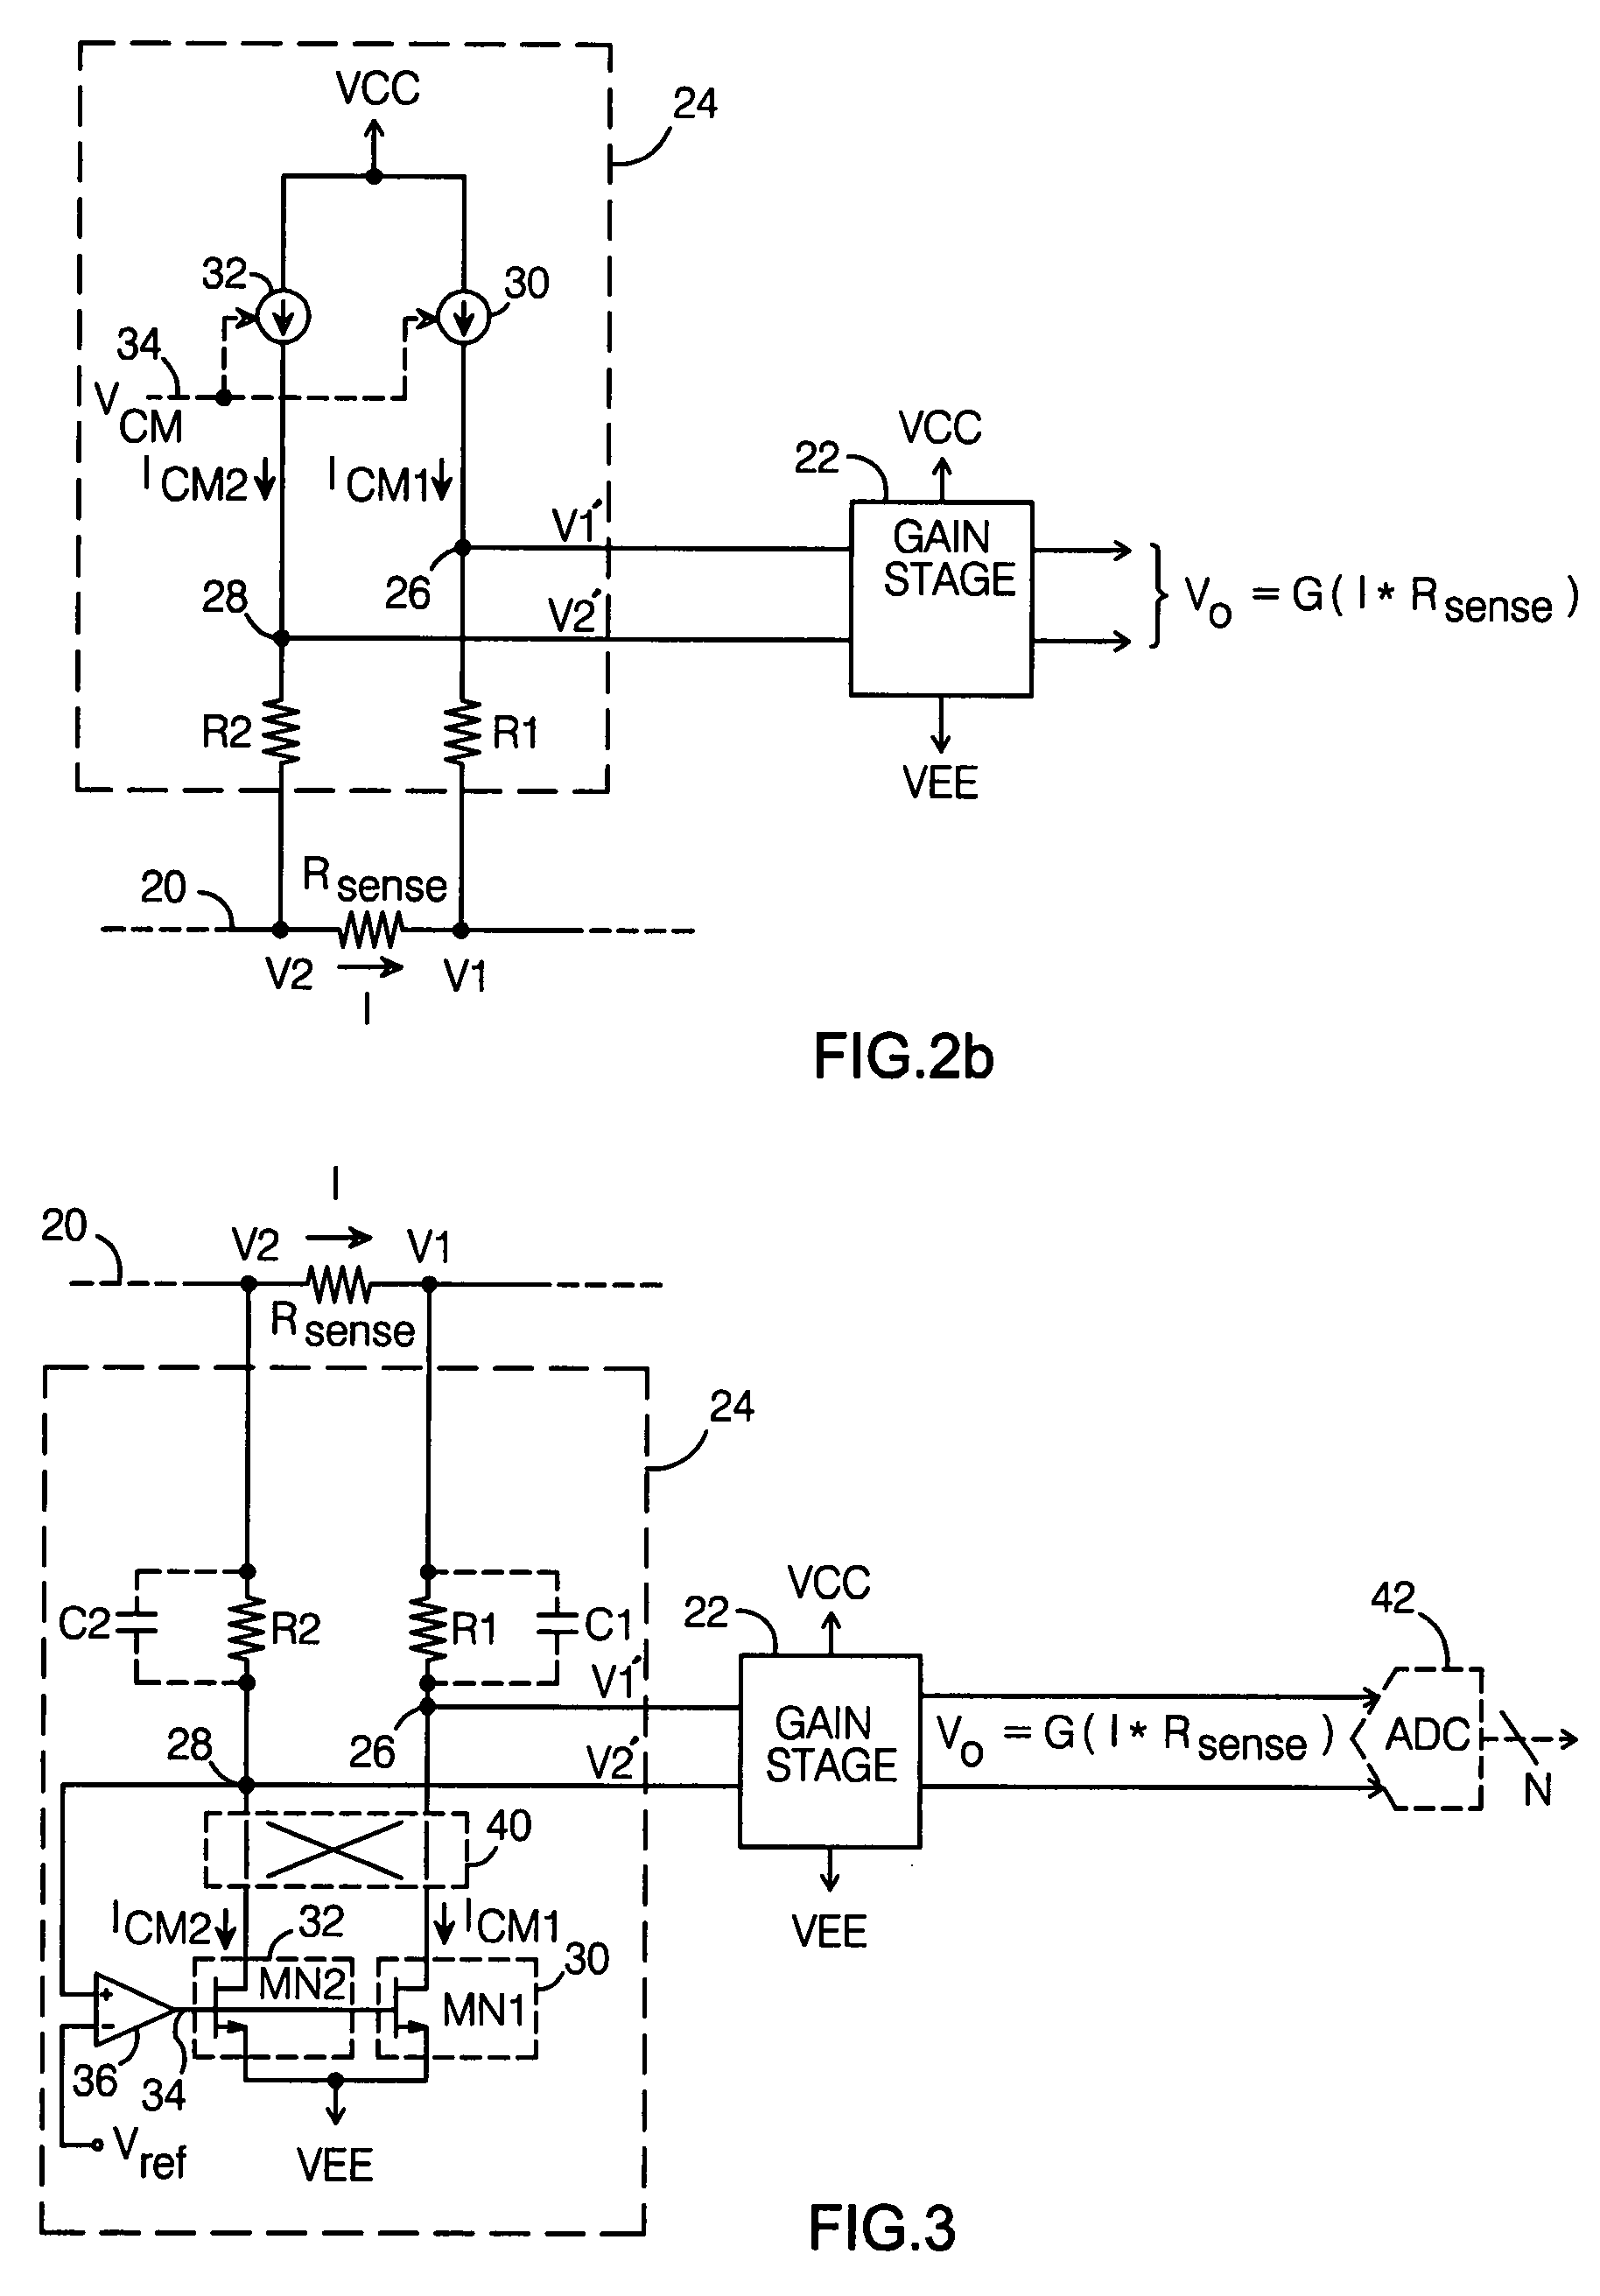 High-side current sense circuit with common-mode voltage reduction